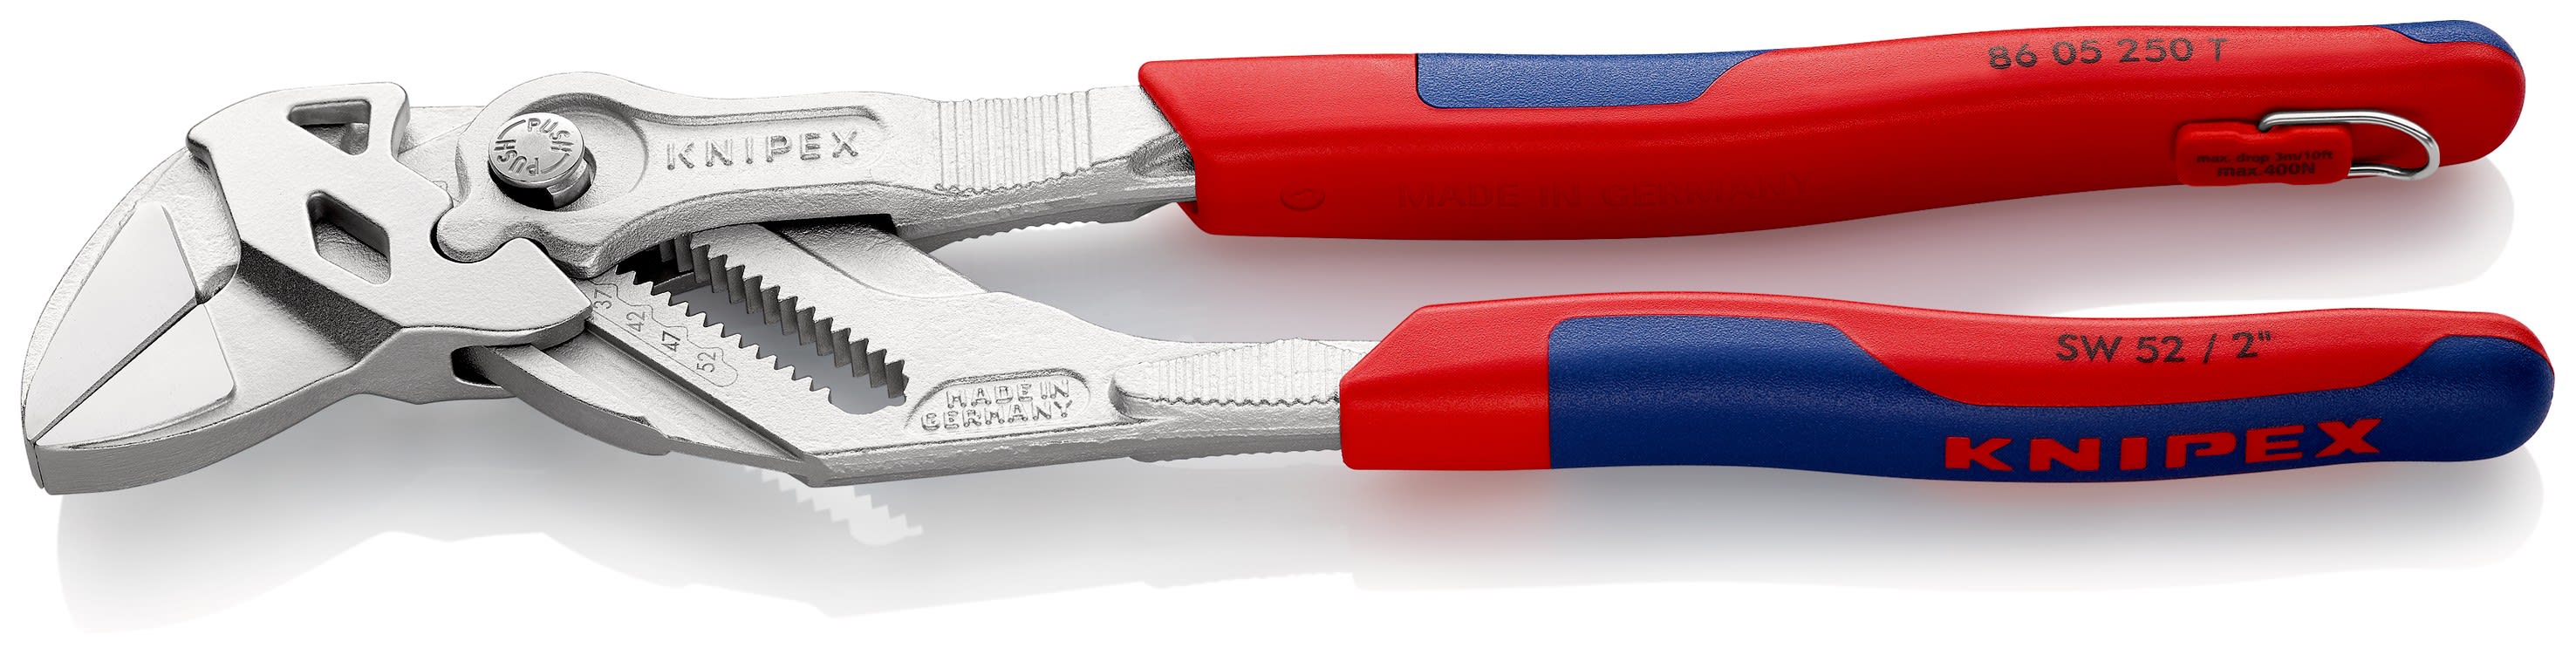 KNIPEX - Pince-cle 250mm - Bi-matiere - Chromee - oeillet antichute - Ouverture 52mm